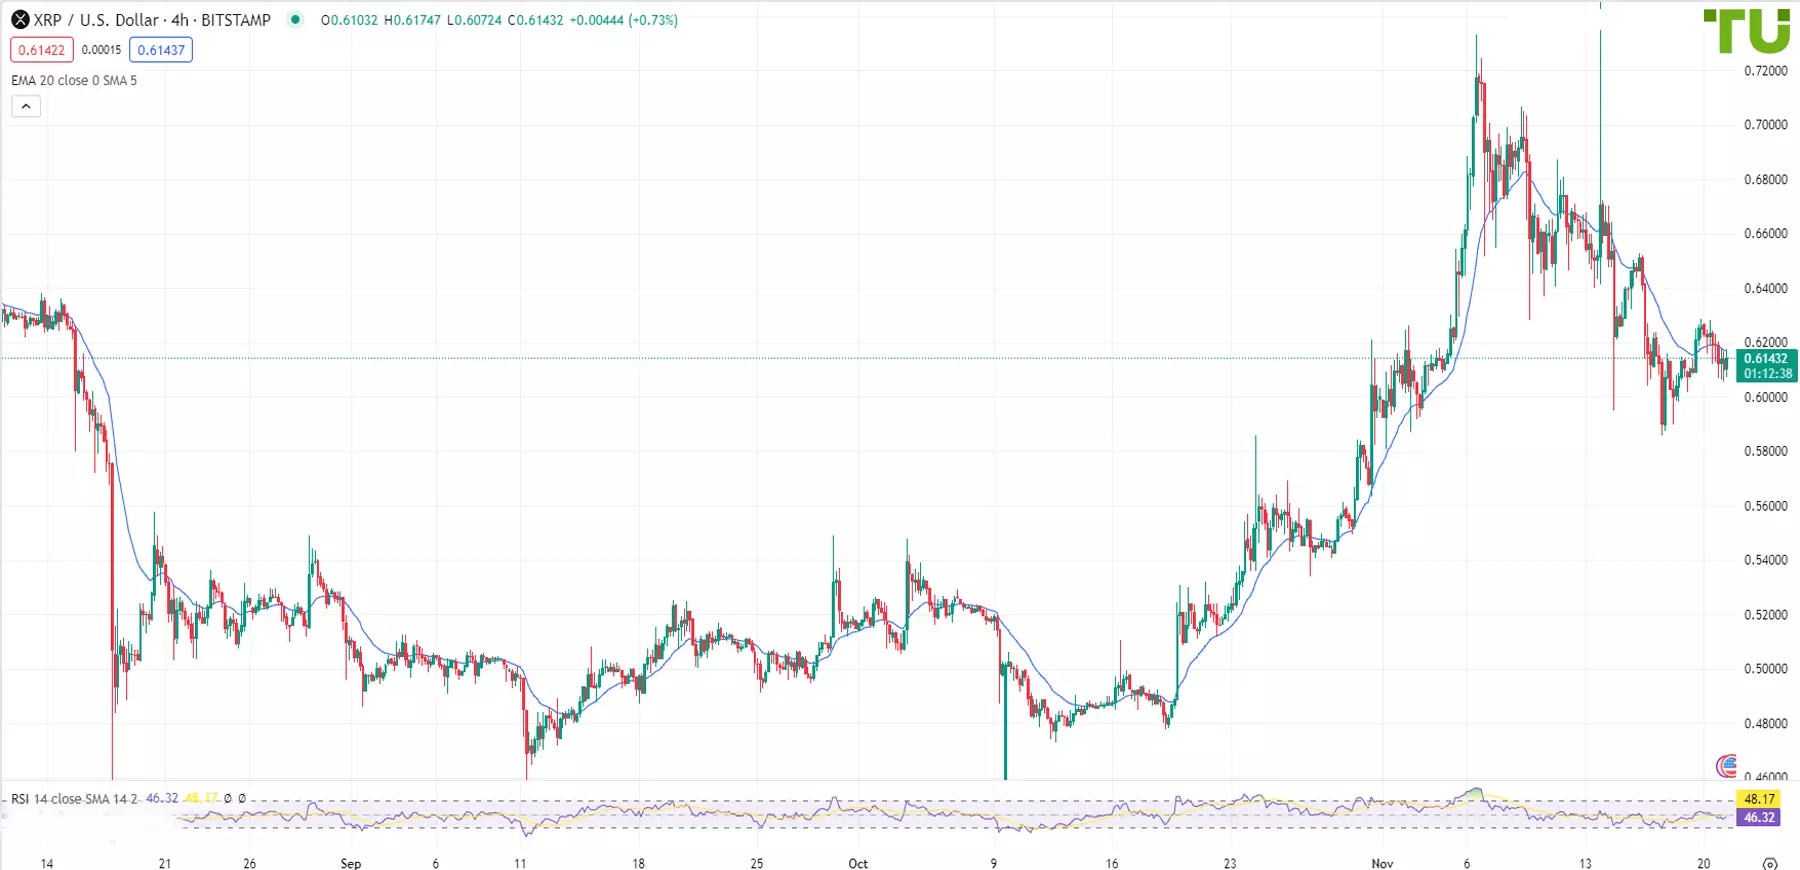 XRP/USD under pressure after growth